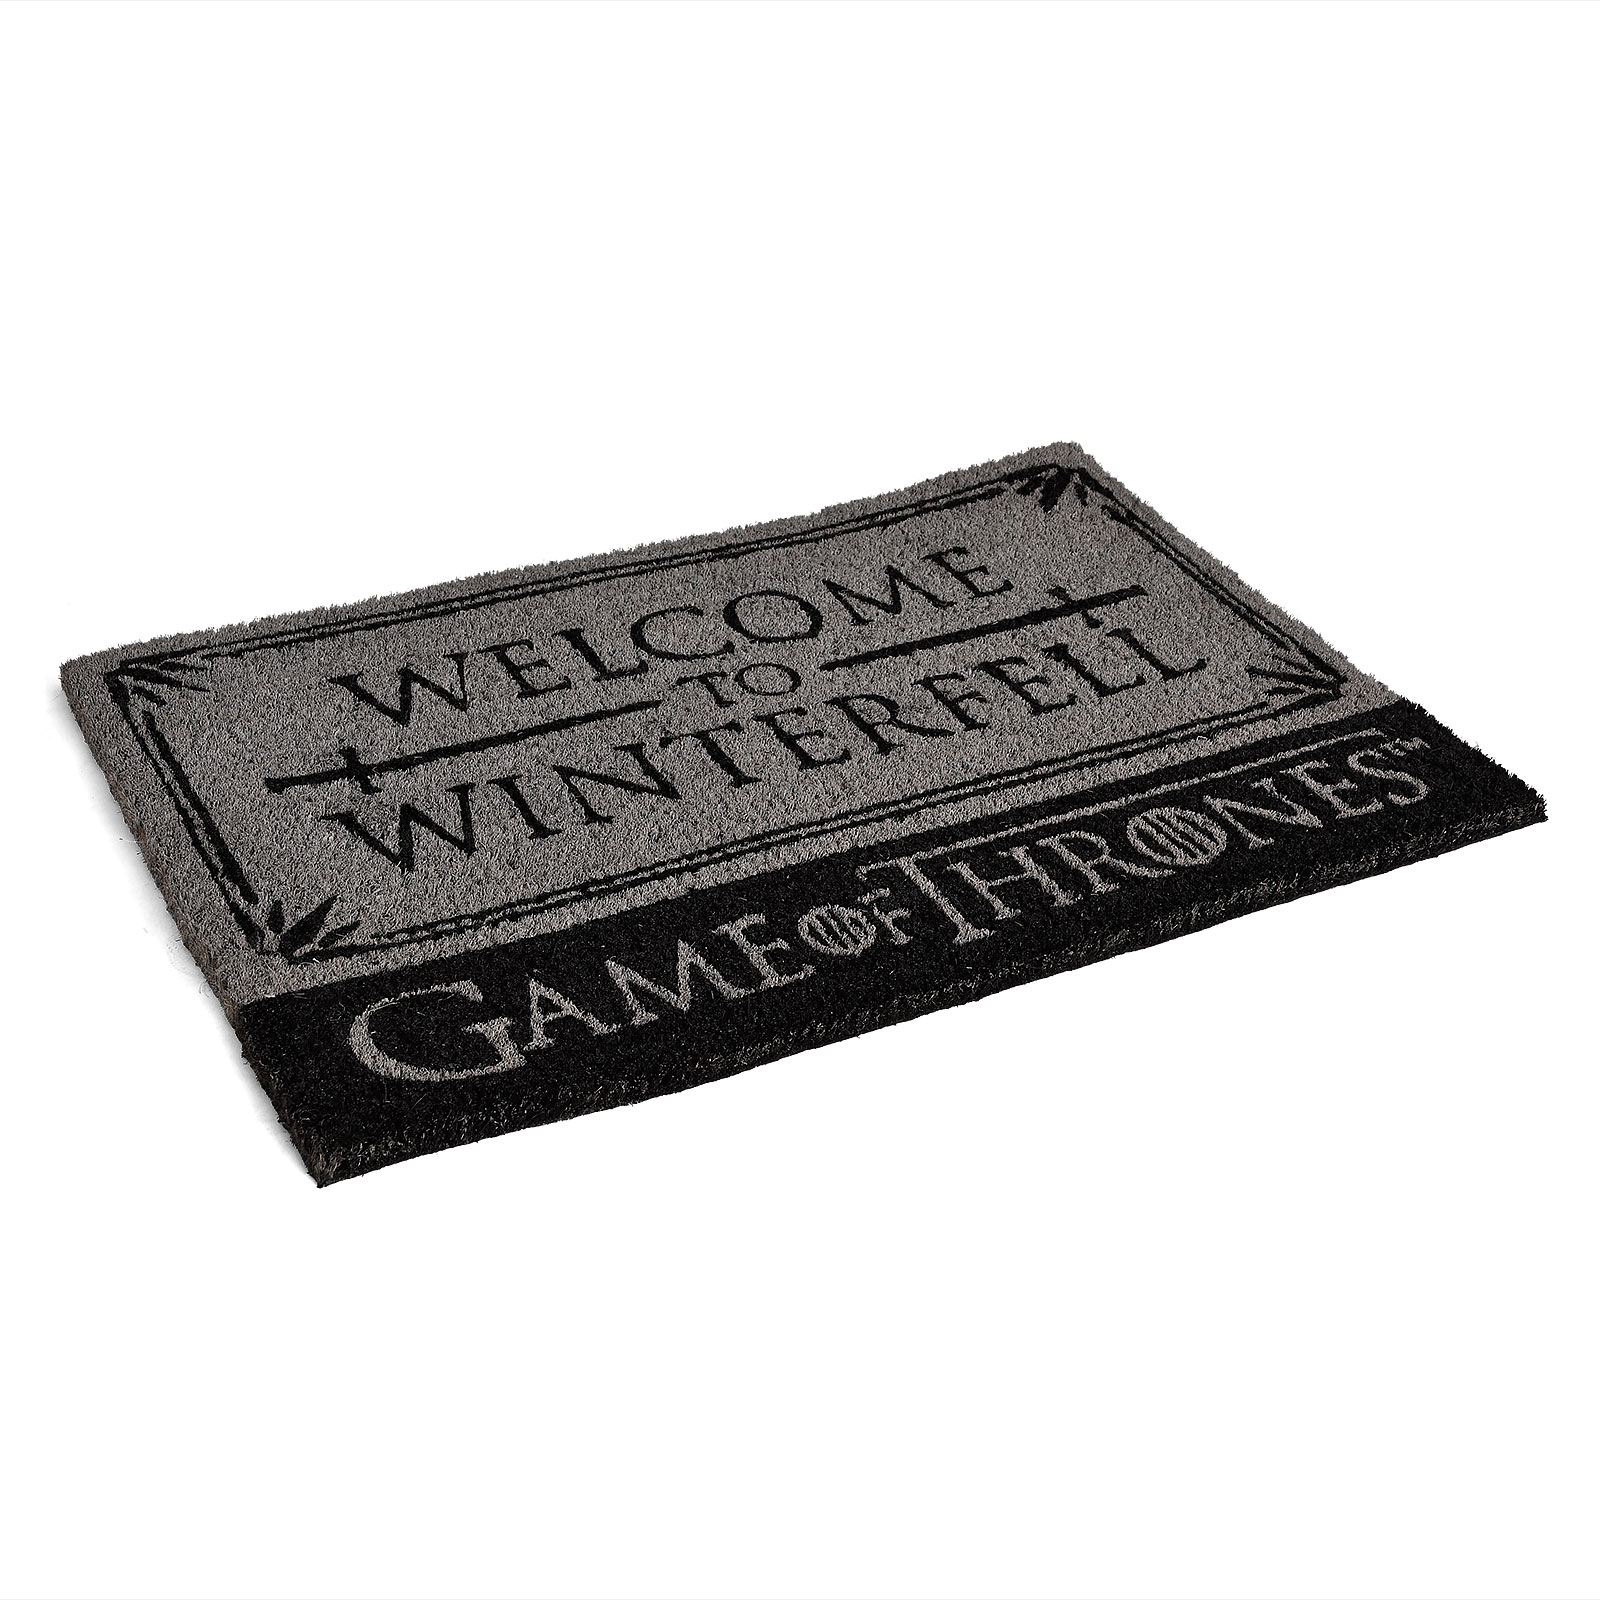 Tapis de sol Game of Thrones - Stark Welcome to Winterfell